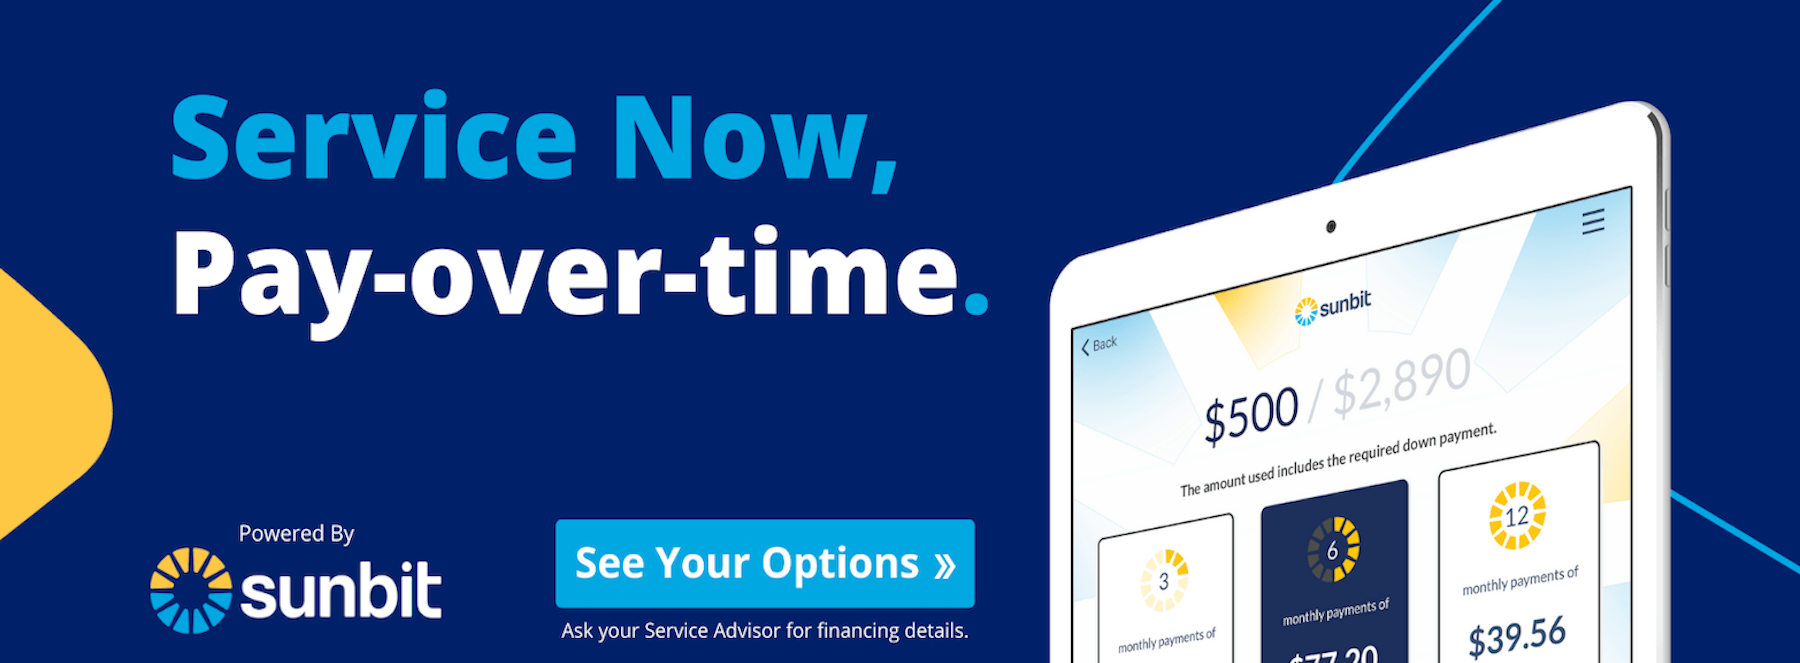 Service Now, Pay Over Time - See Options